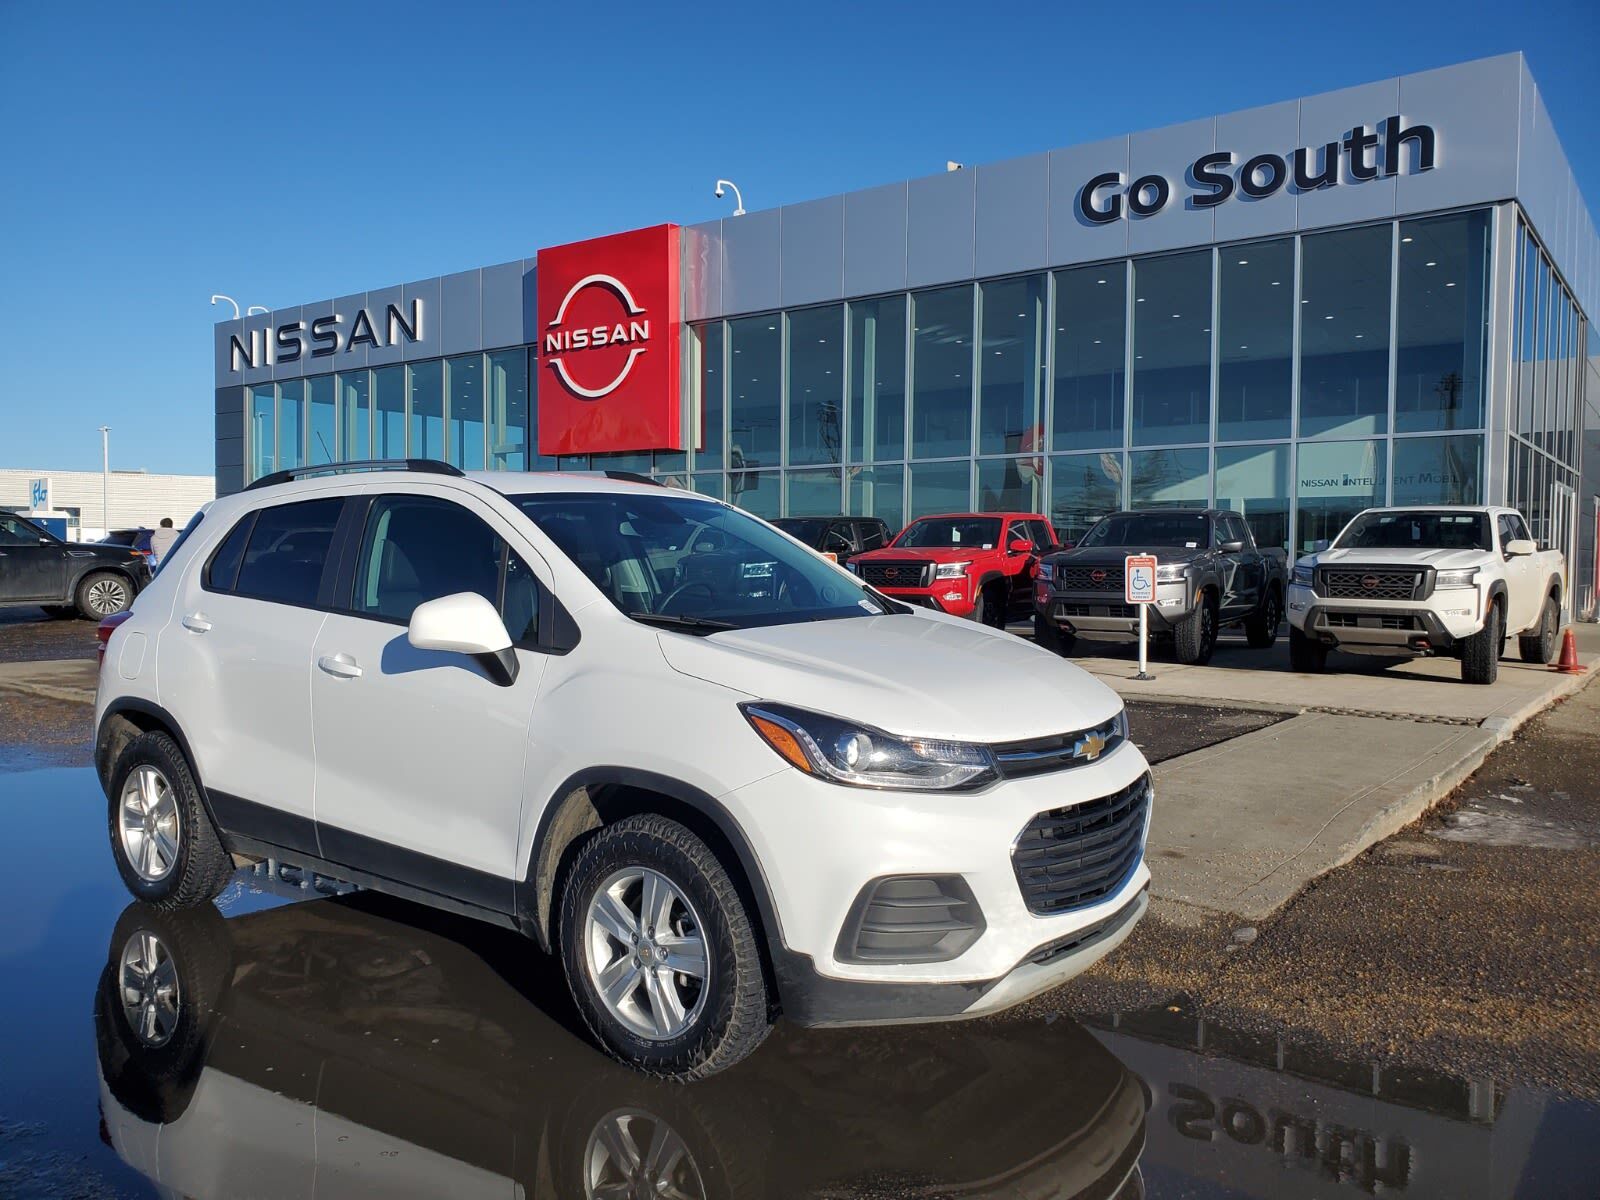 2021 Chevrolet Trax LT, AWD, LEATHER